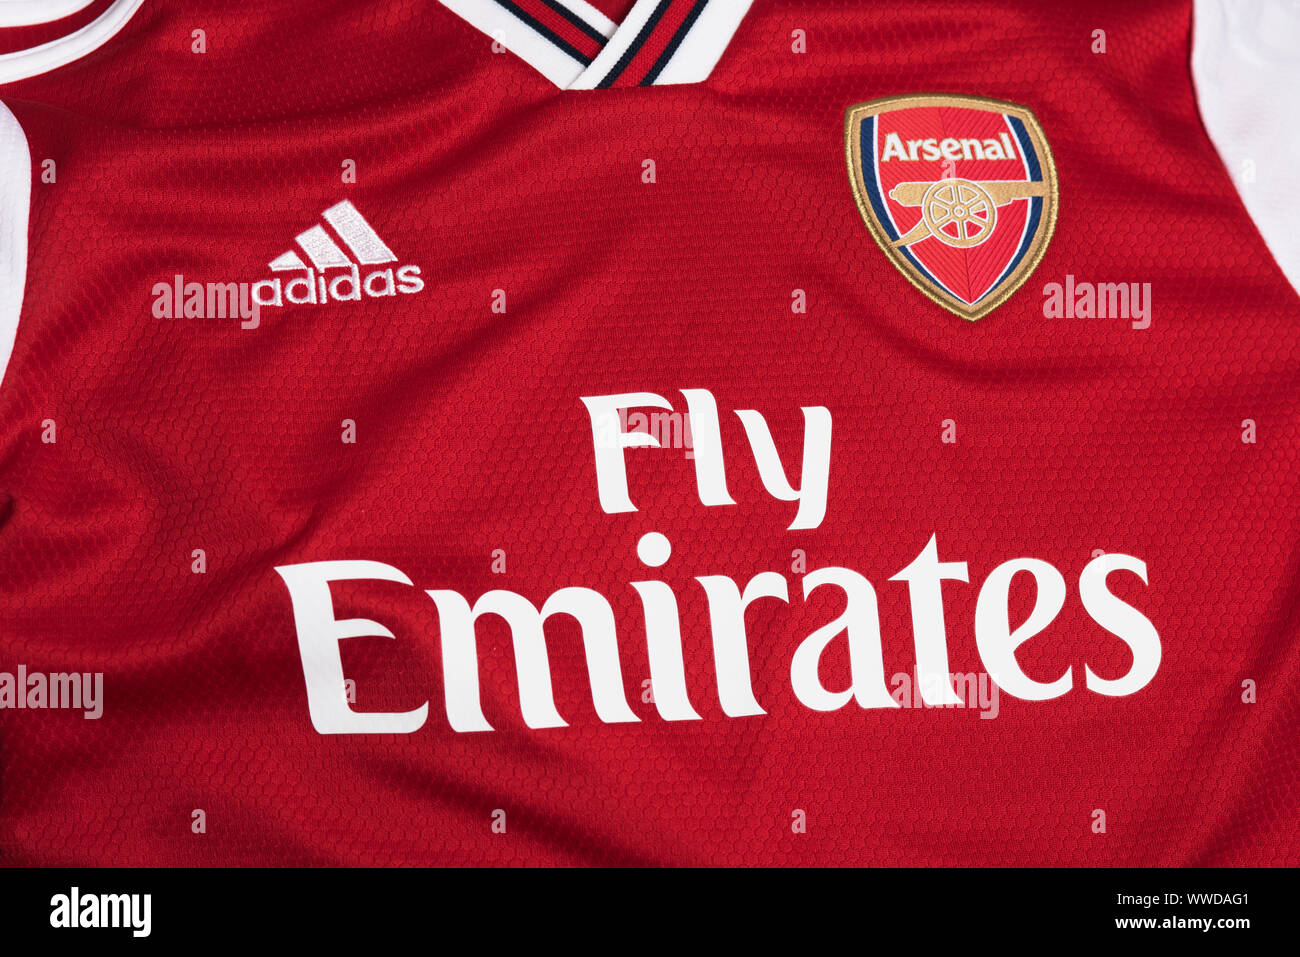 Adidas shirt High Resolution Stock Photography and Images - Alamy